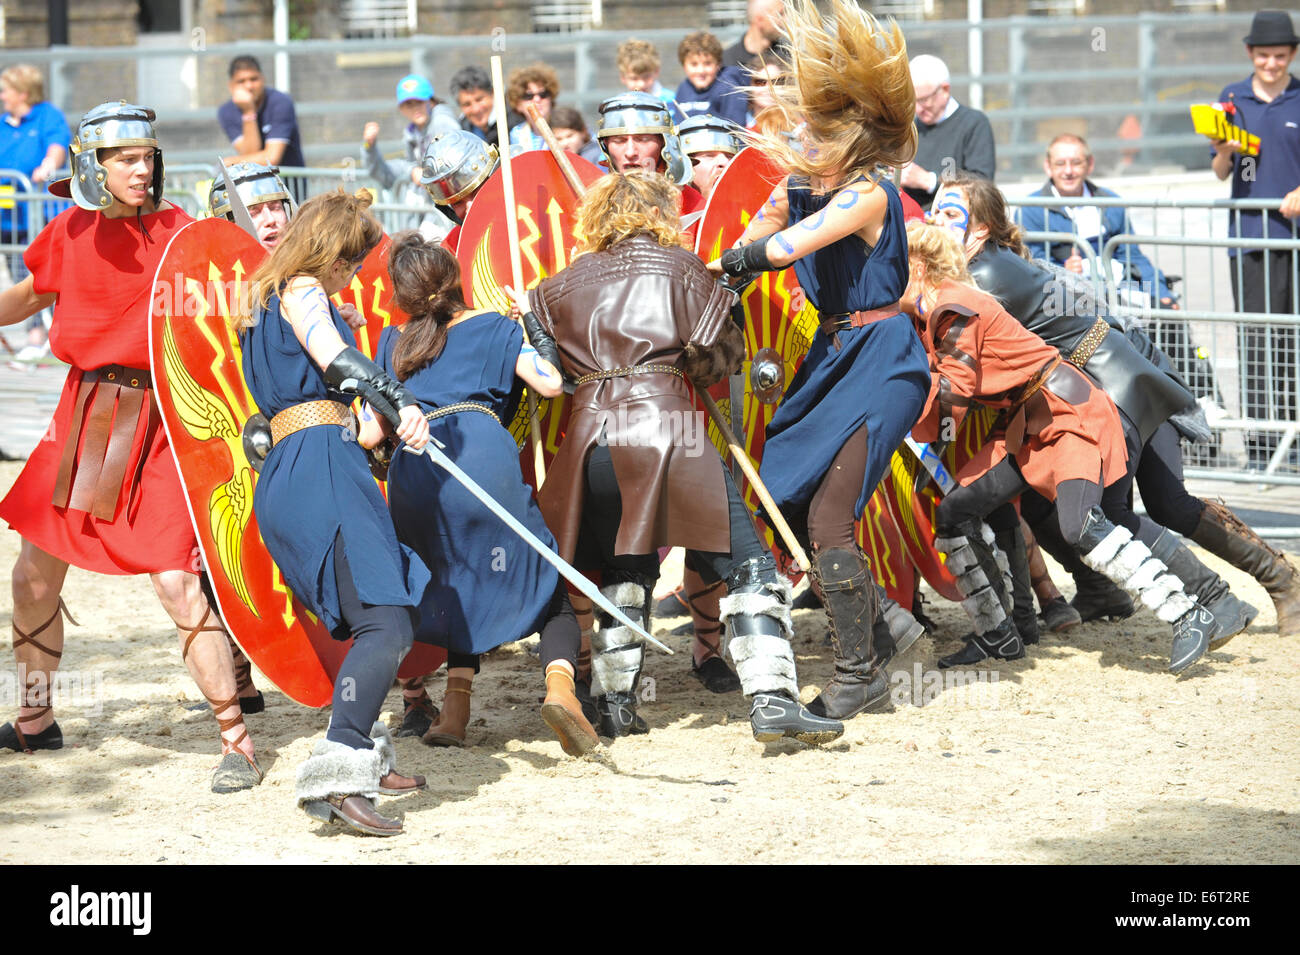 Granary Square, Kings Cross, London, UK. 30th August 2014. Are-enactment of Romans versus Britons at the Romans vs Boudicca event in Granary Square. Credit:  Matthew Chattle/Alamy Live News Stock Photo